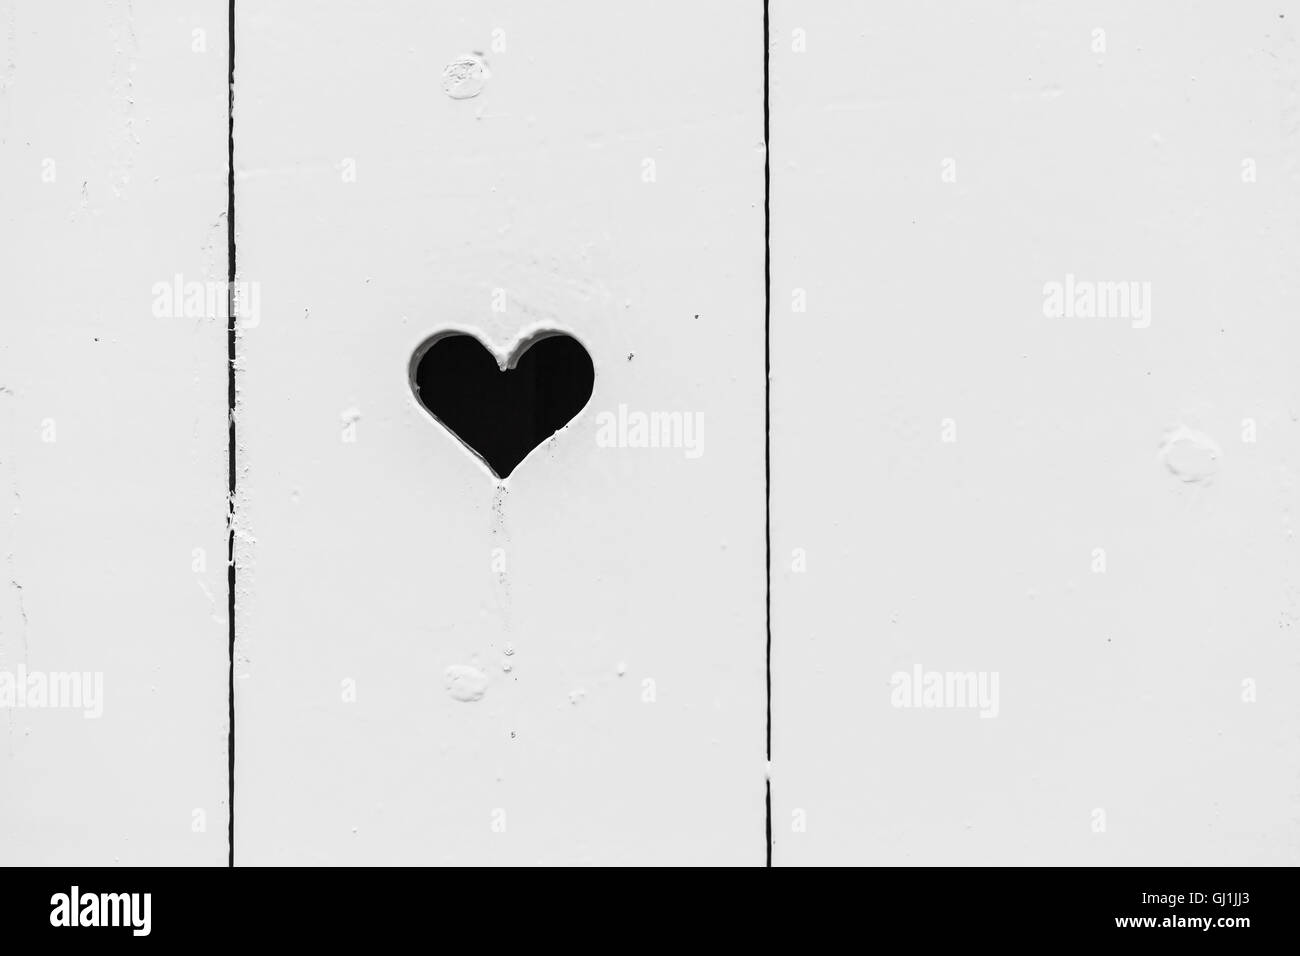 Black heart shaped hole in white wooden wall, background photo texture Stock Photo